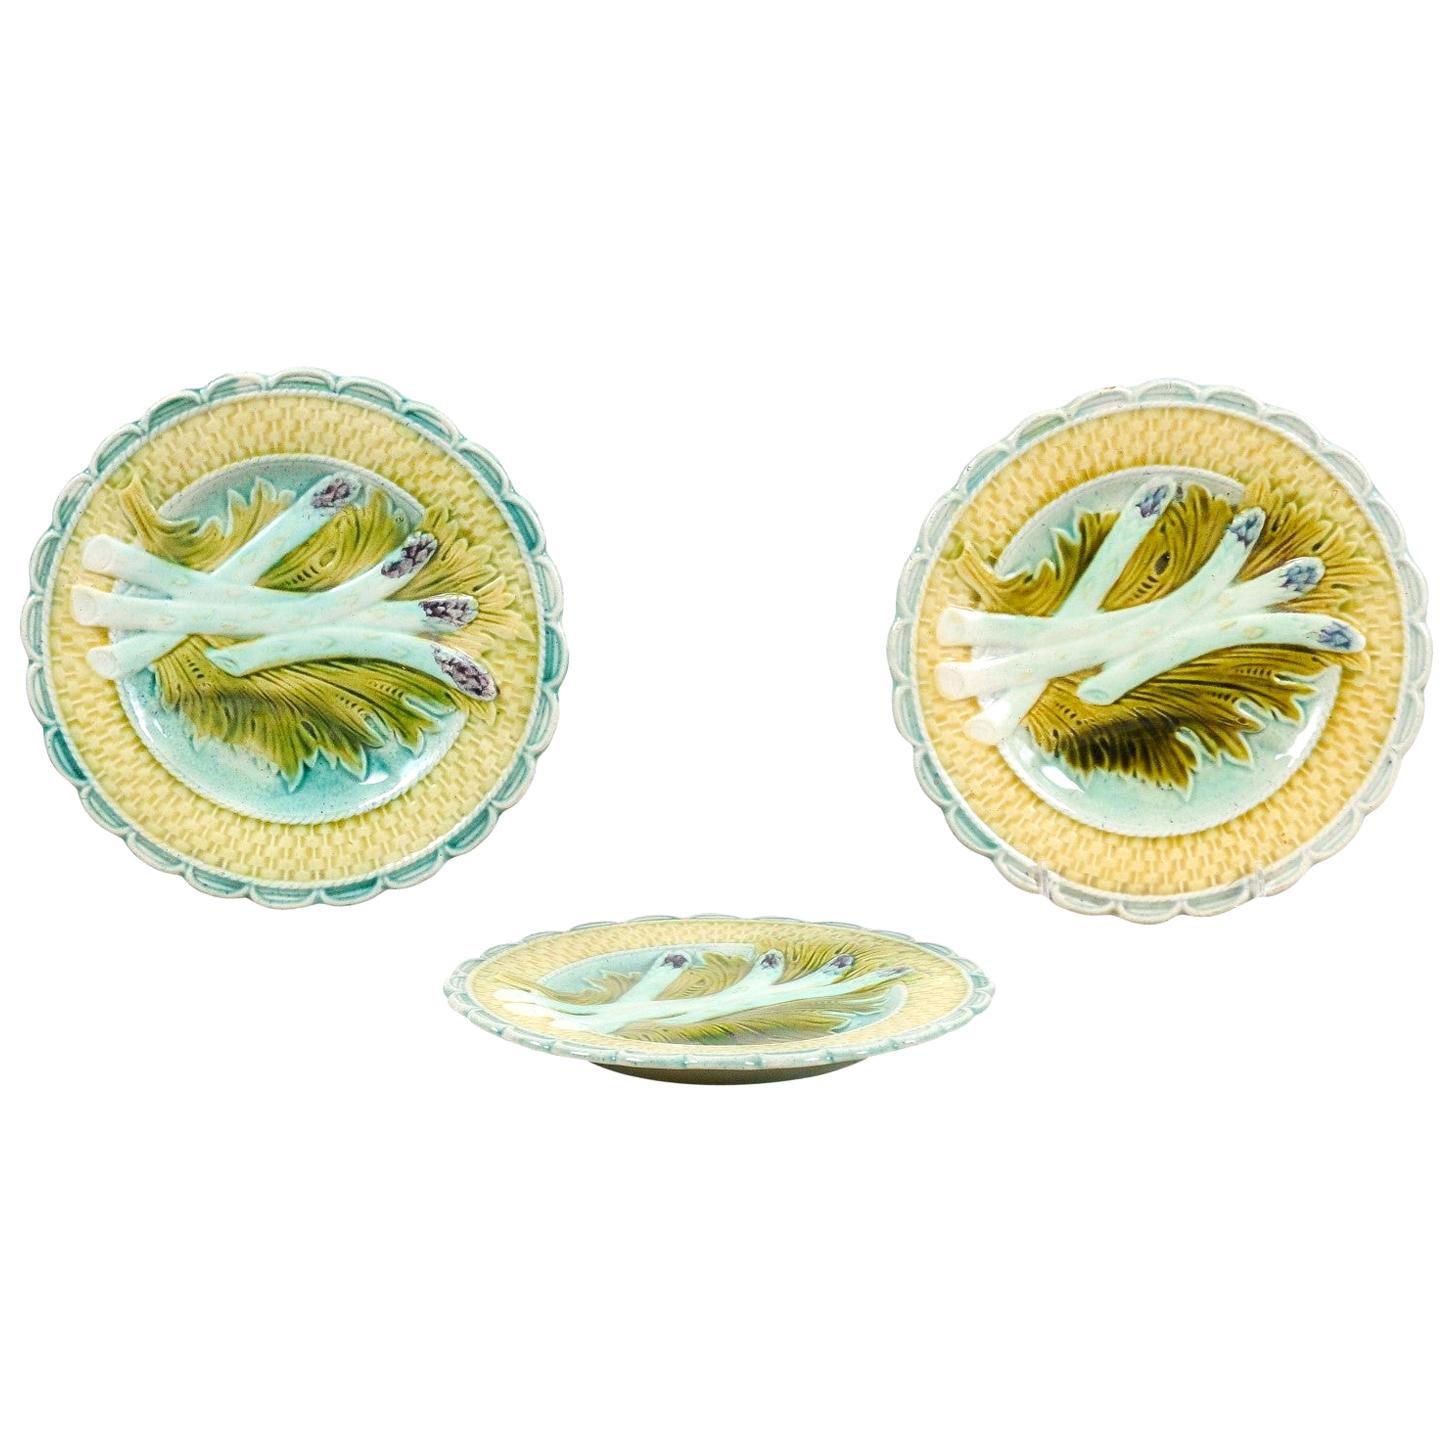 French 1850s Majolica Asparagus Plate with Scalloped Edge, Three Available